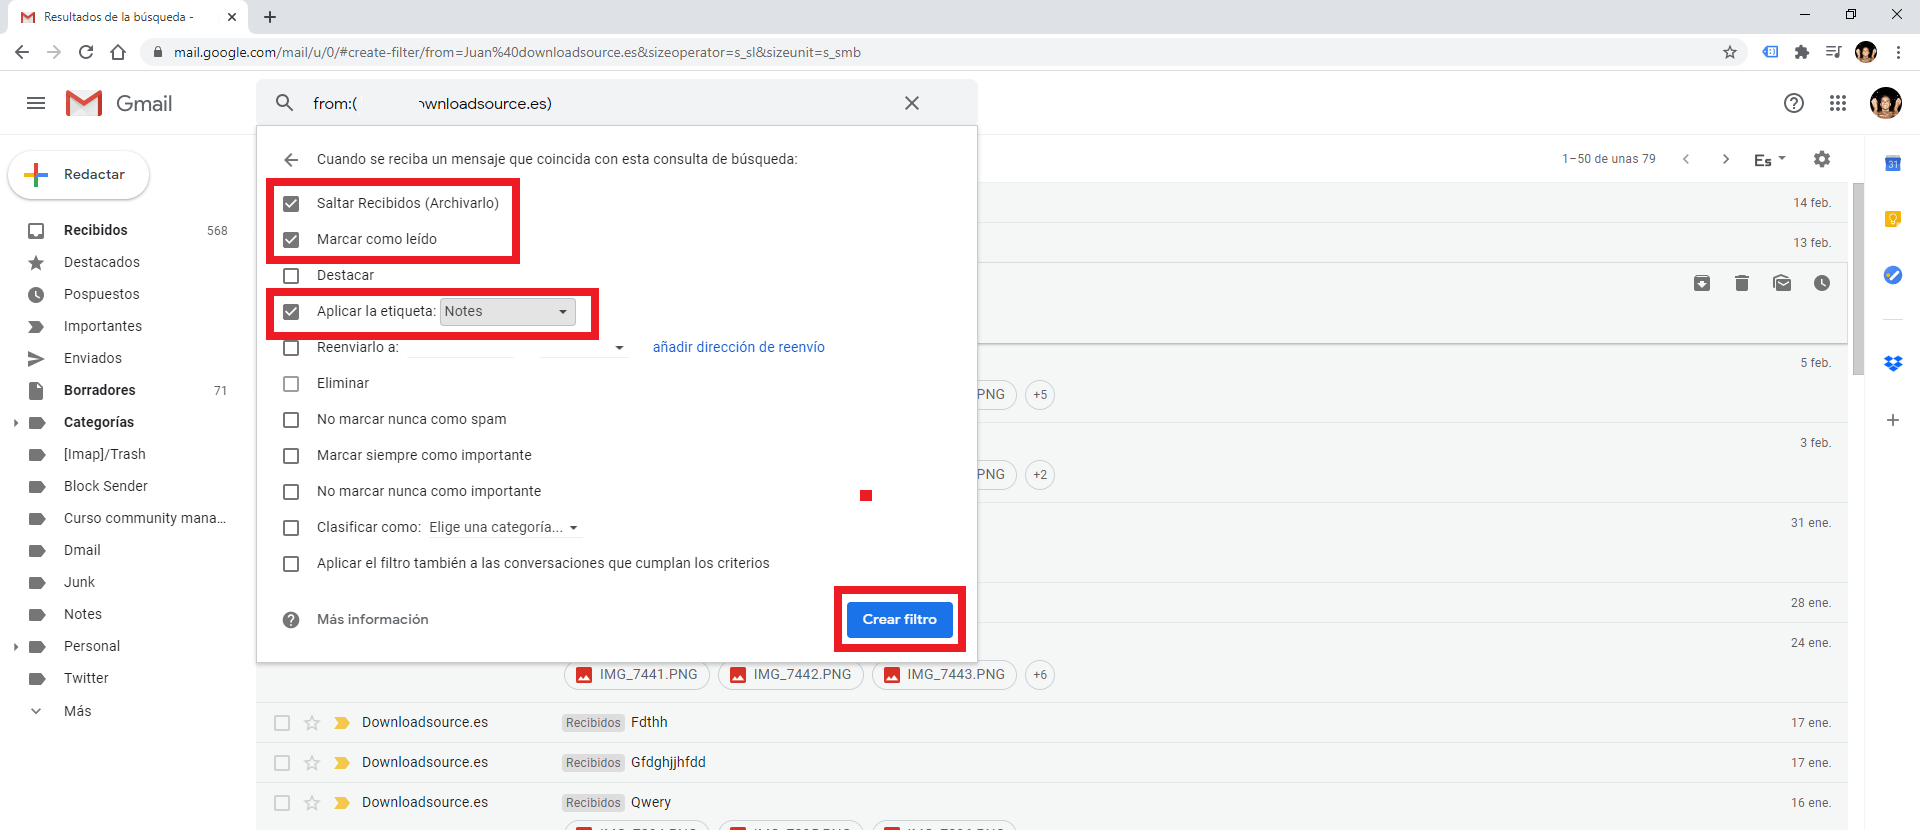 disable notifications of emails received from an email address in Gmail